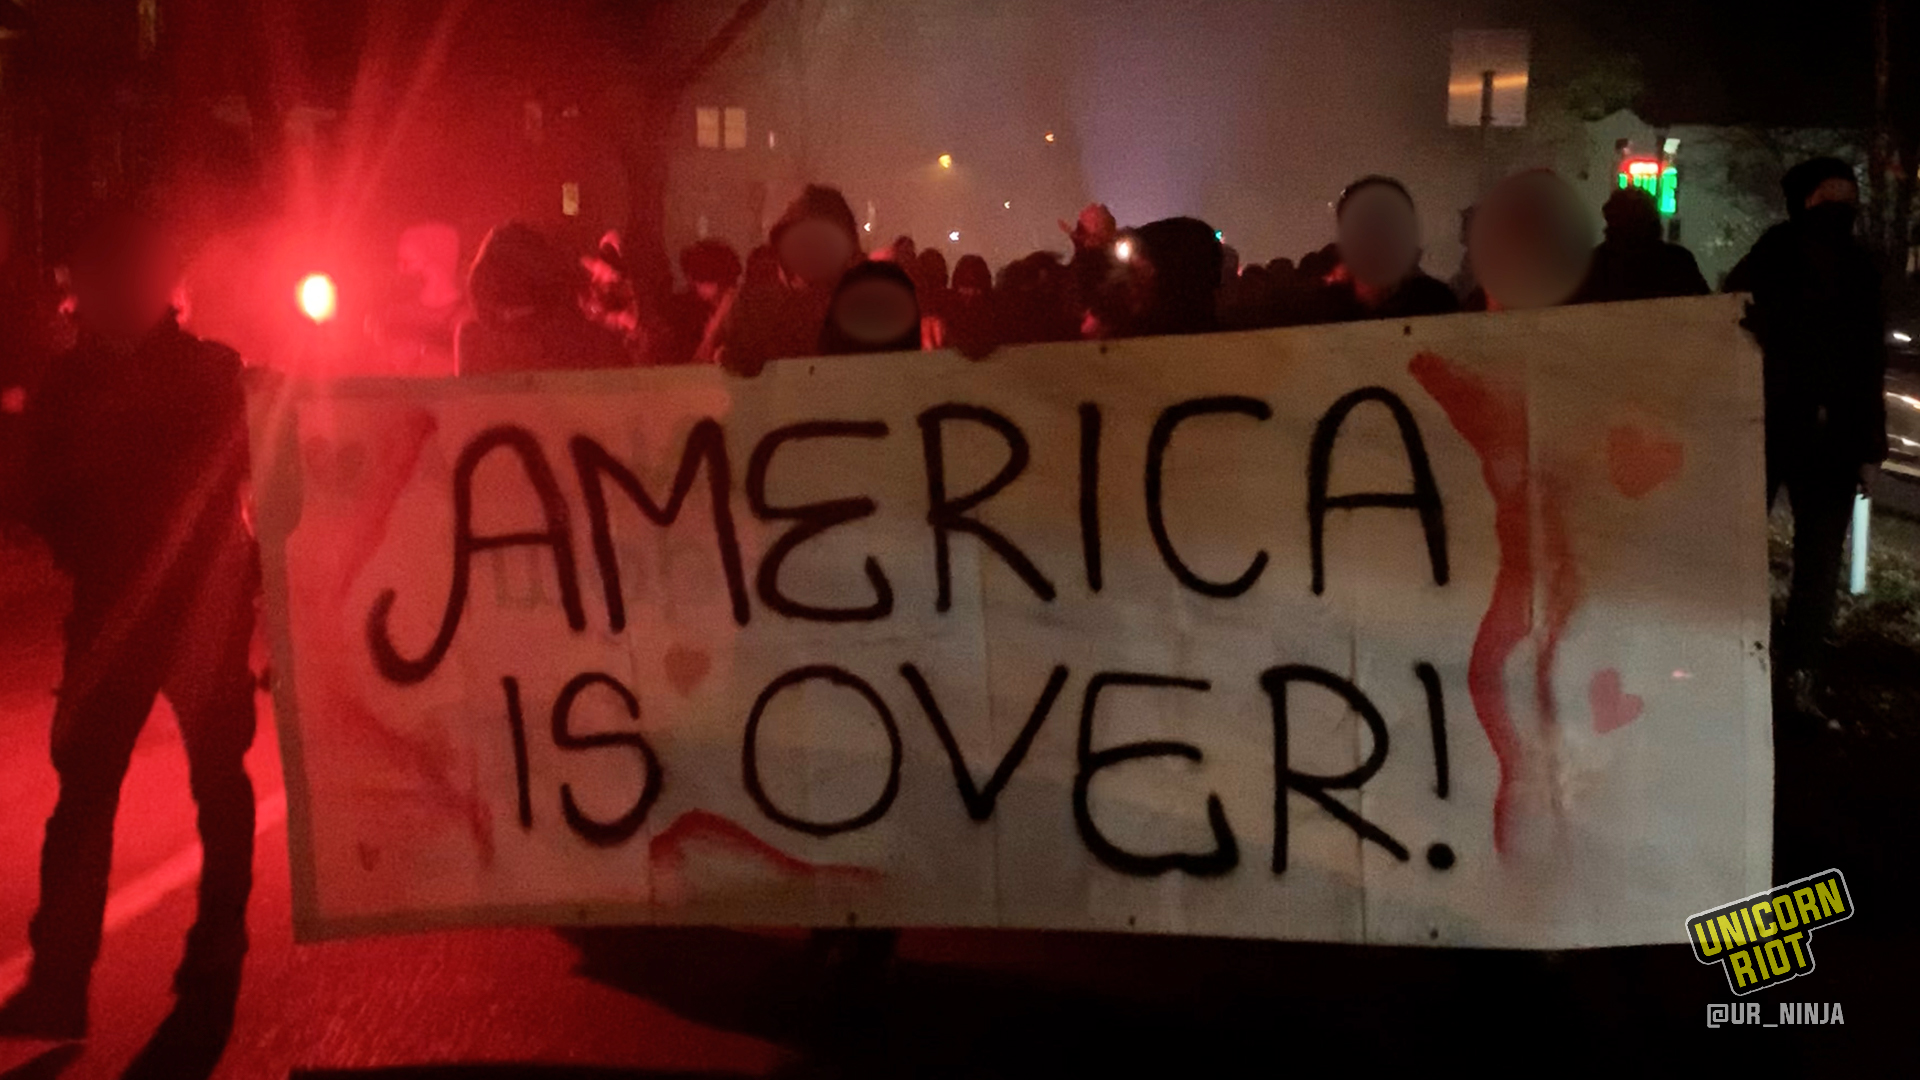 America is Over! banner led mobile dance party